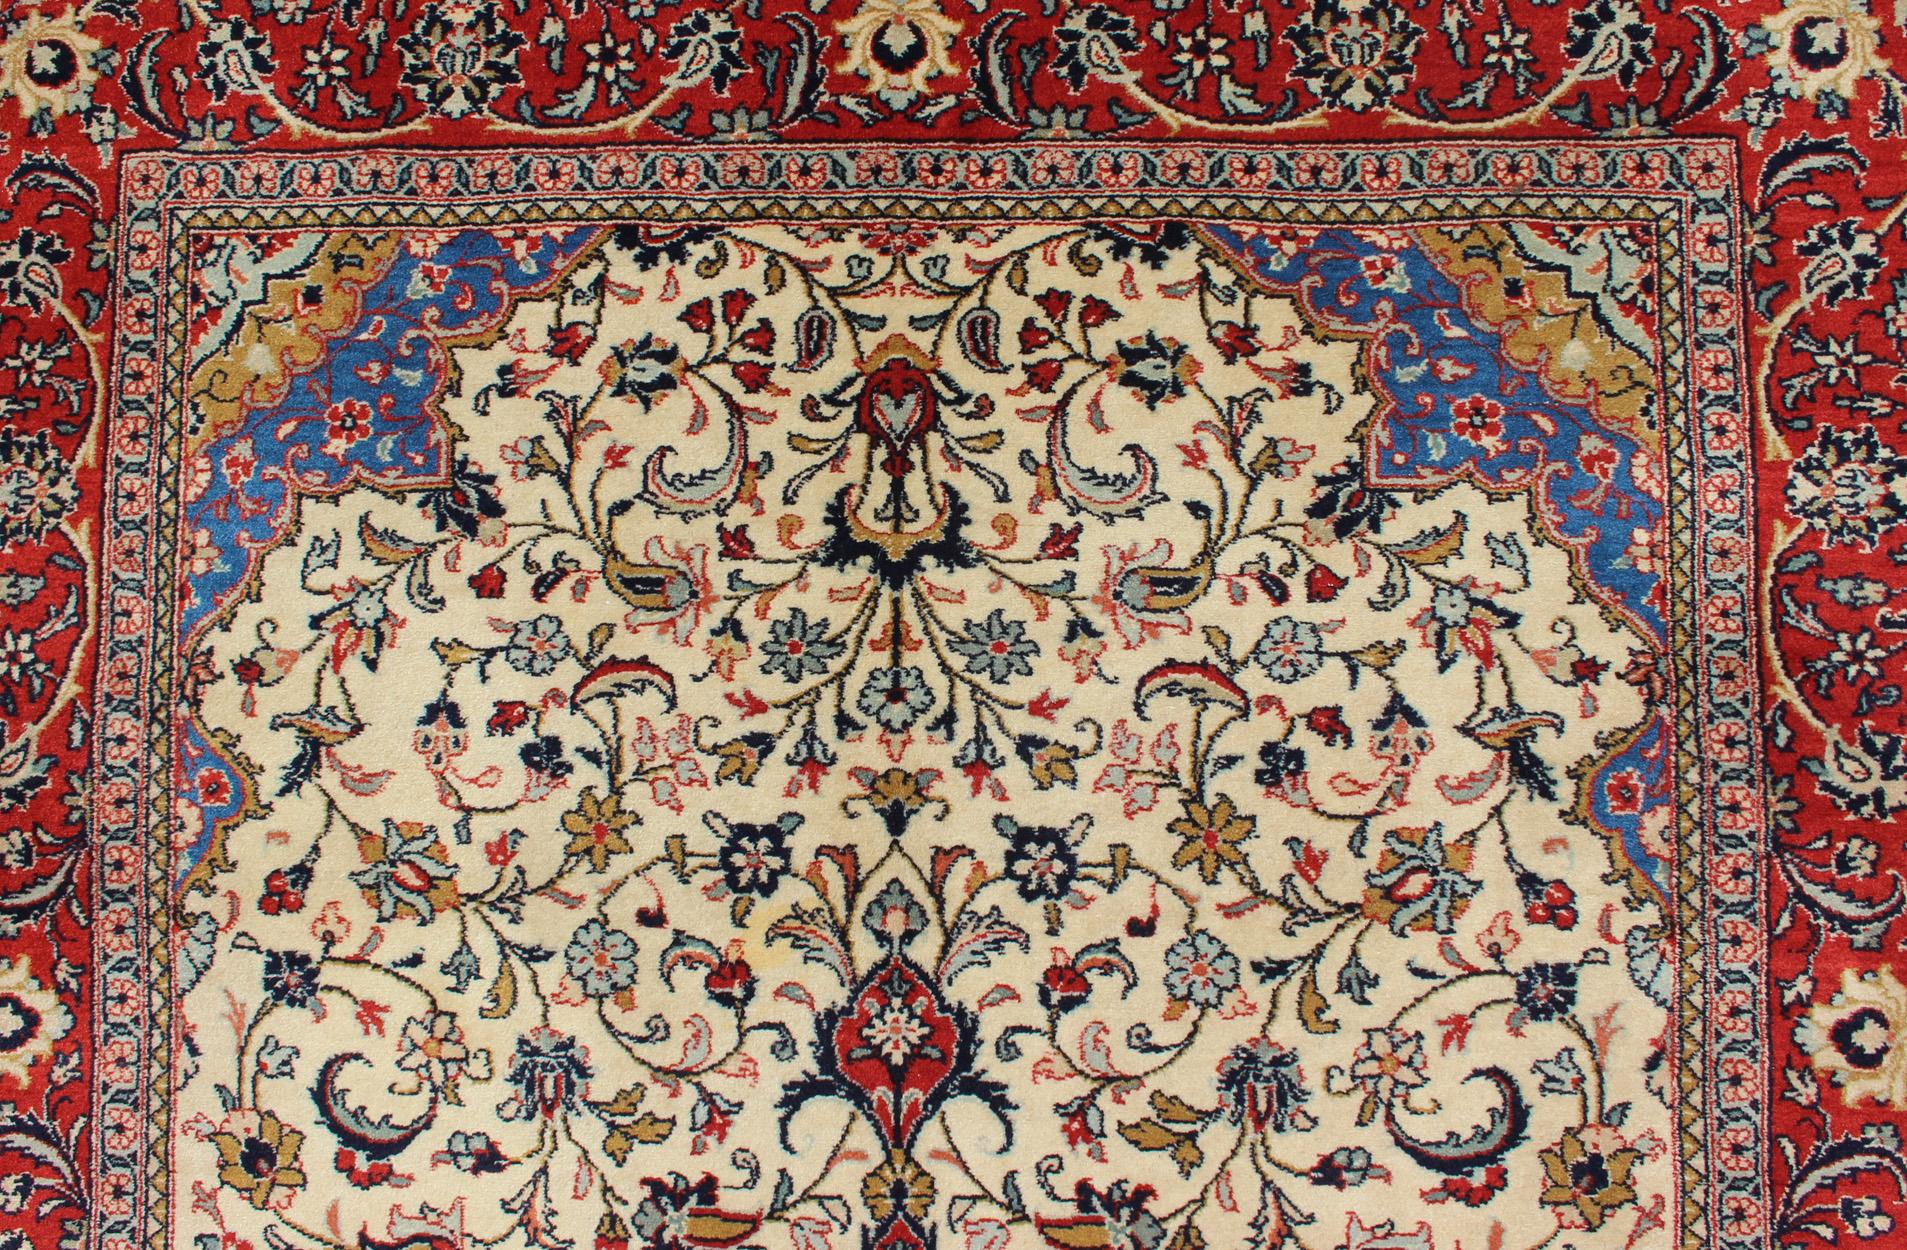 Vintage Persian Tabriz Rug with Floral Design in Cream, blue and Red 1